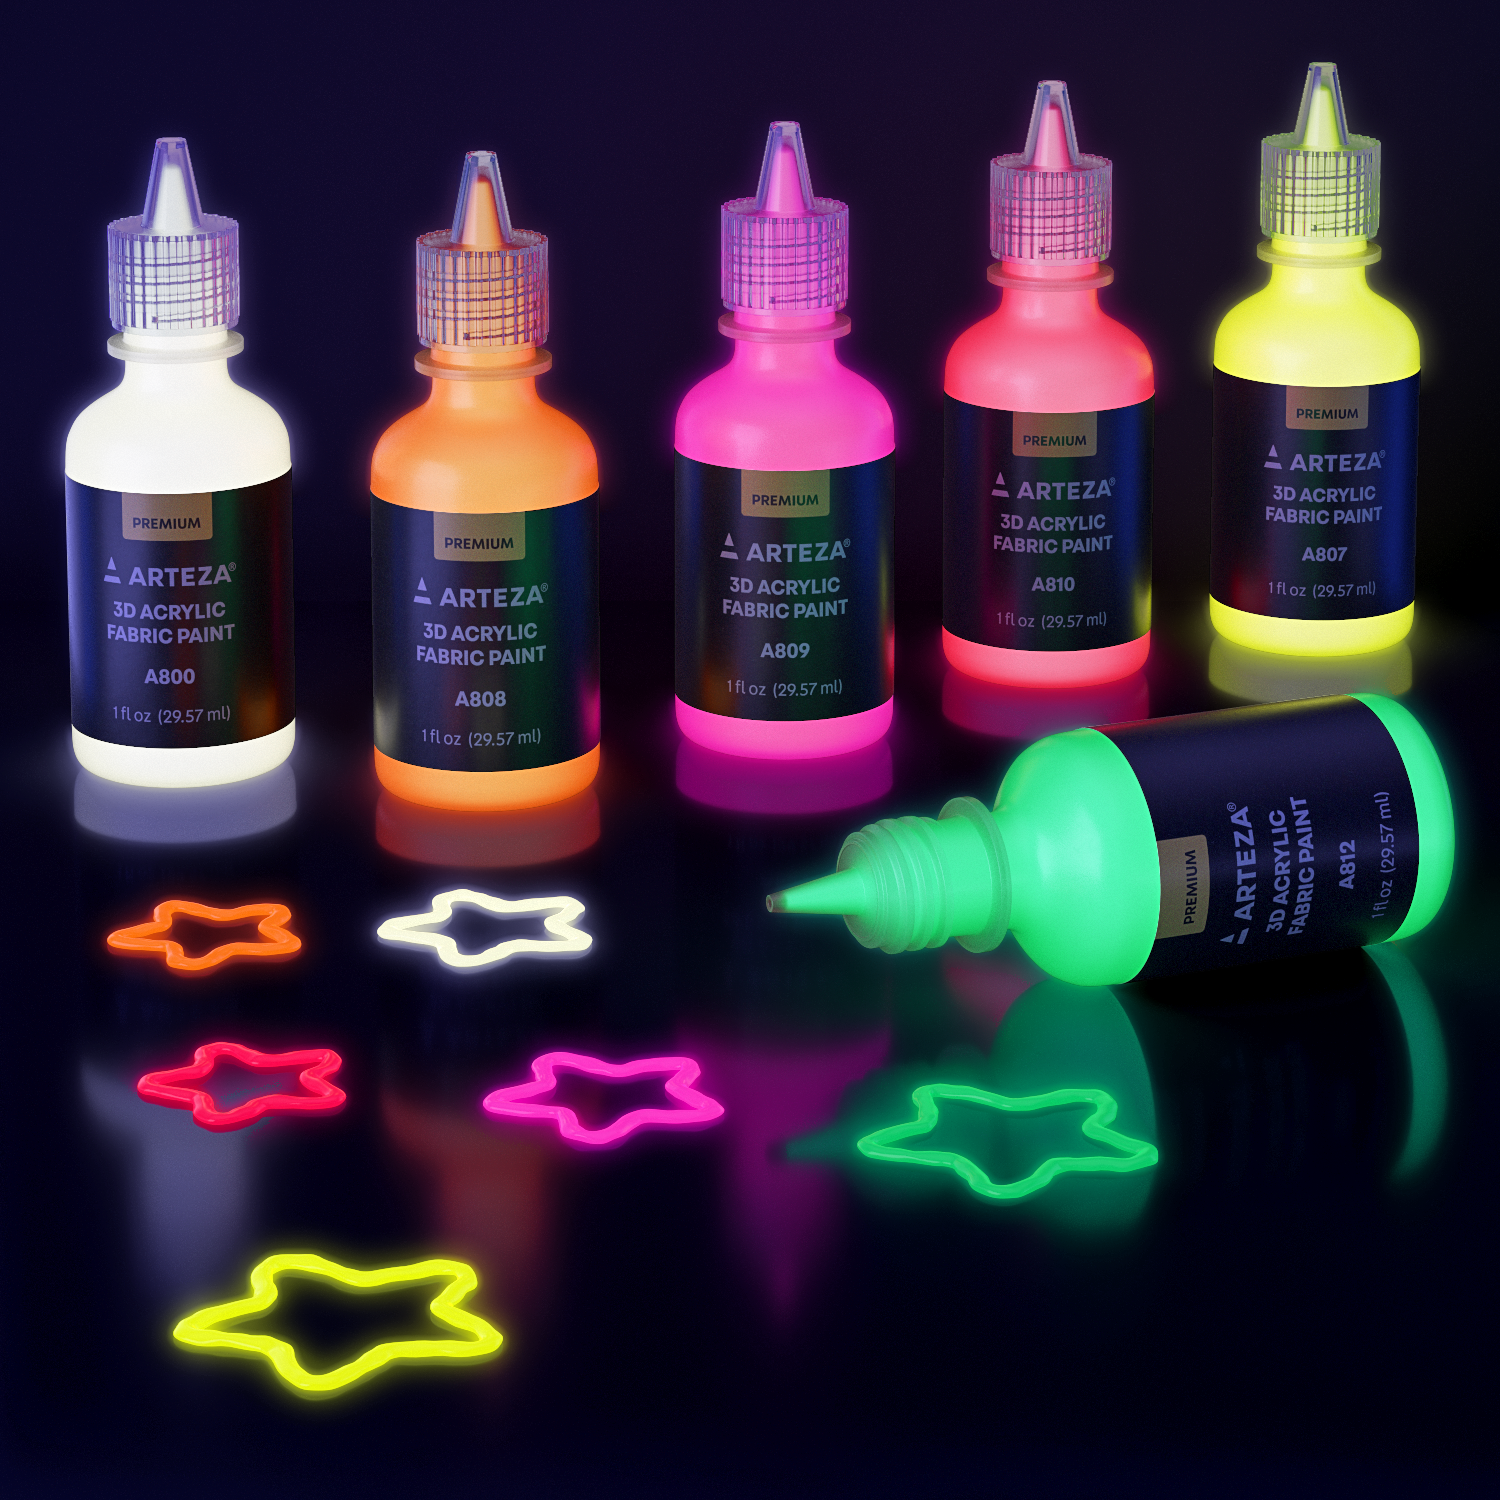 Glow in the Dark Paint - Neon & Crafts - The Glow Company